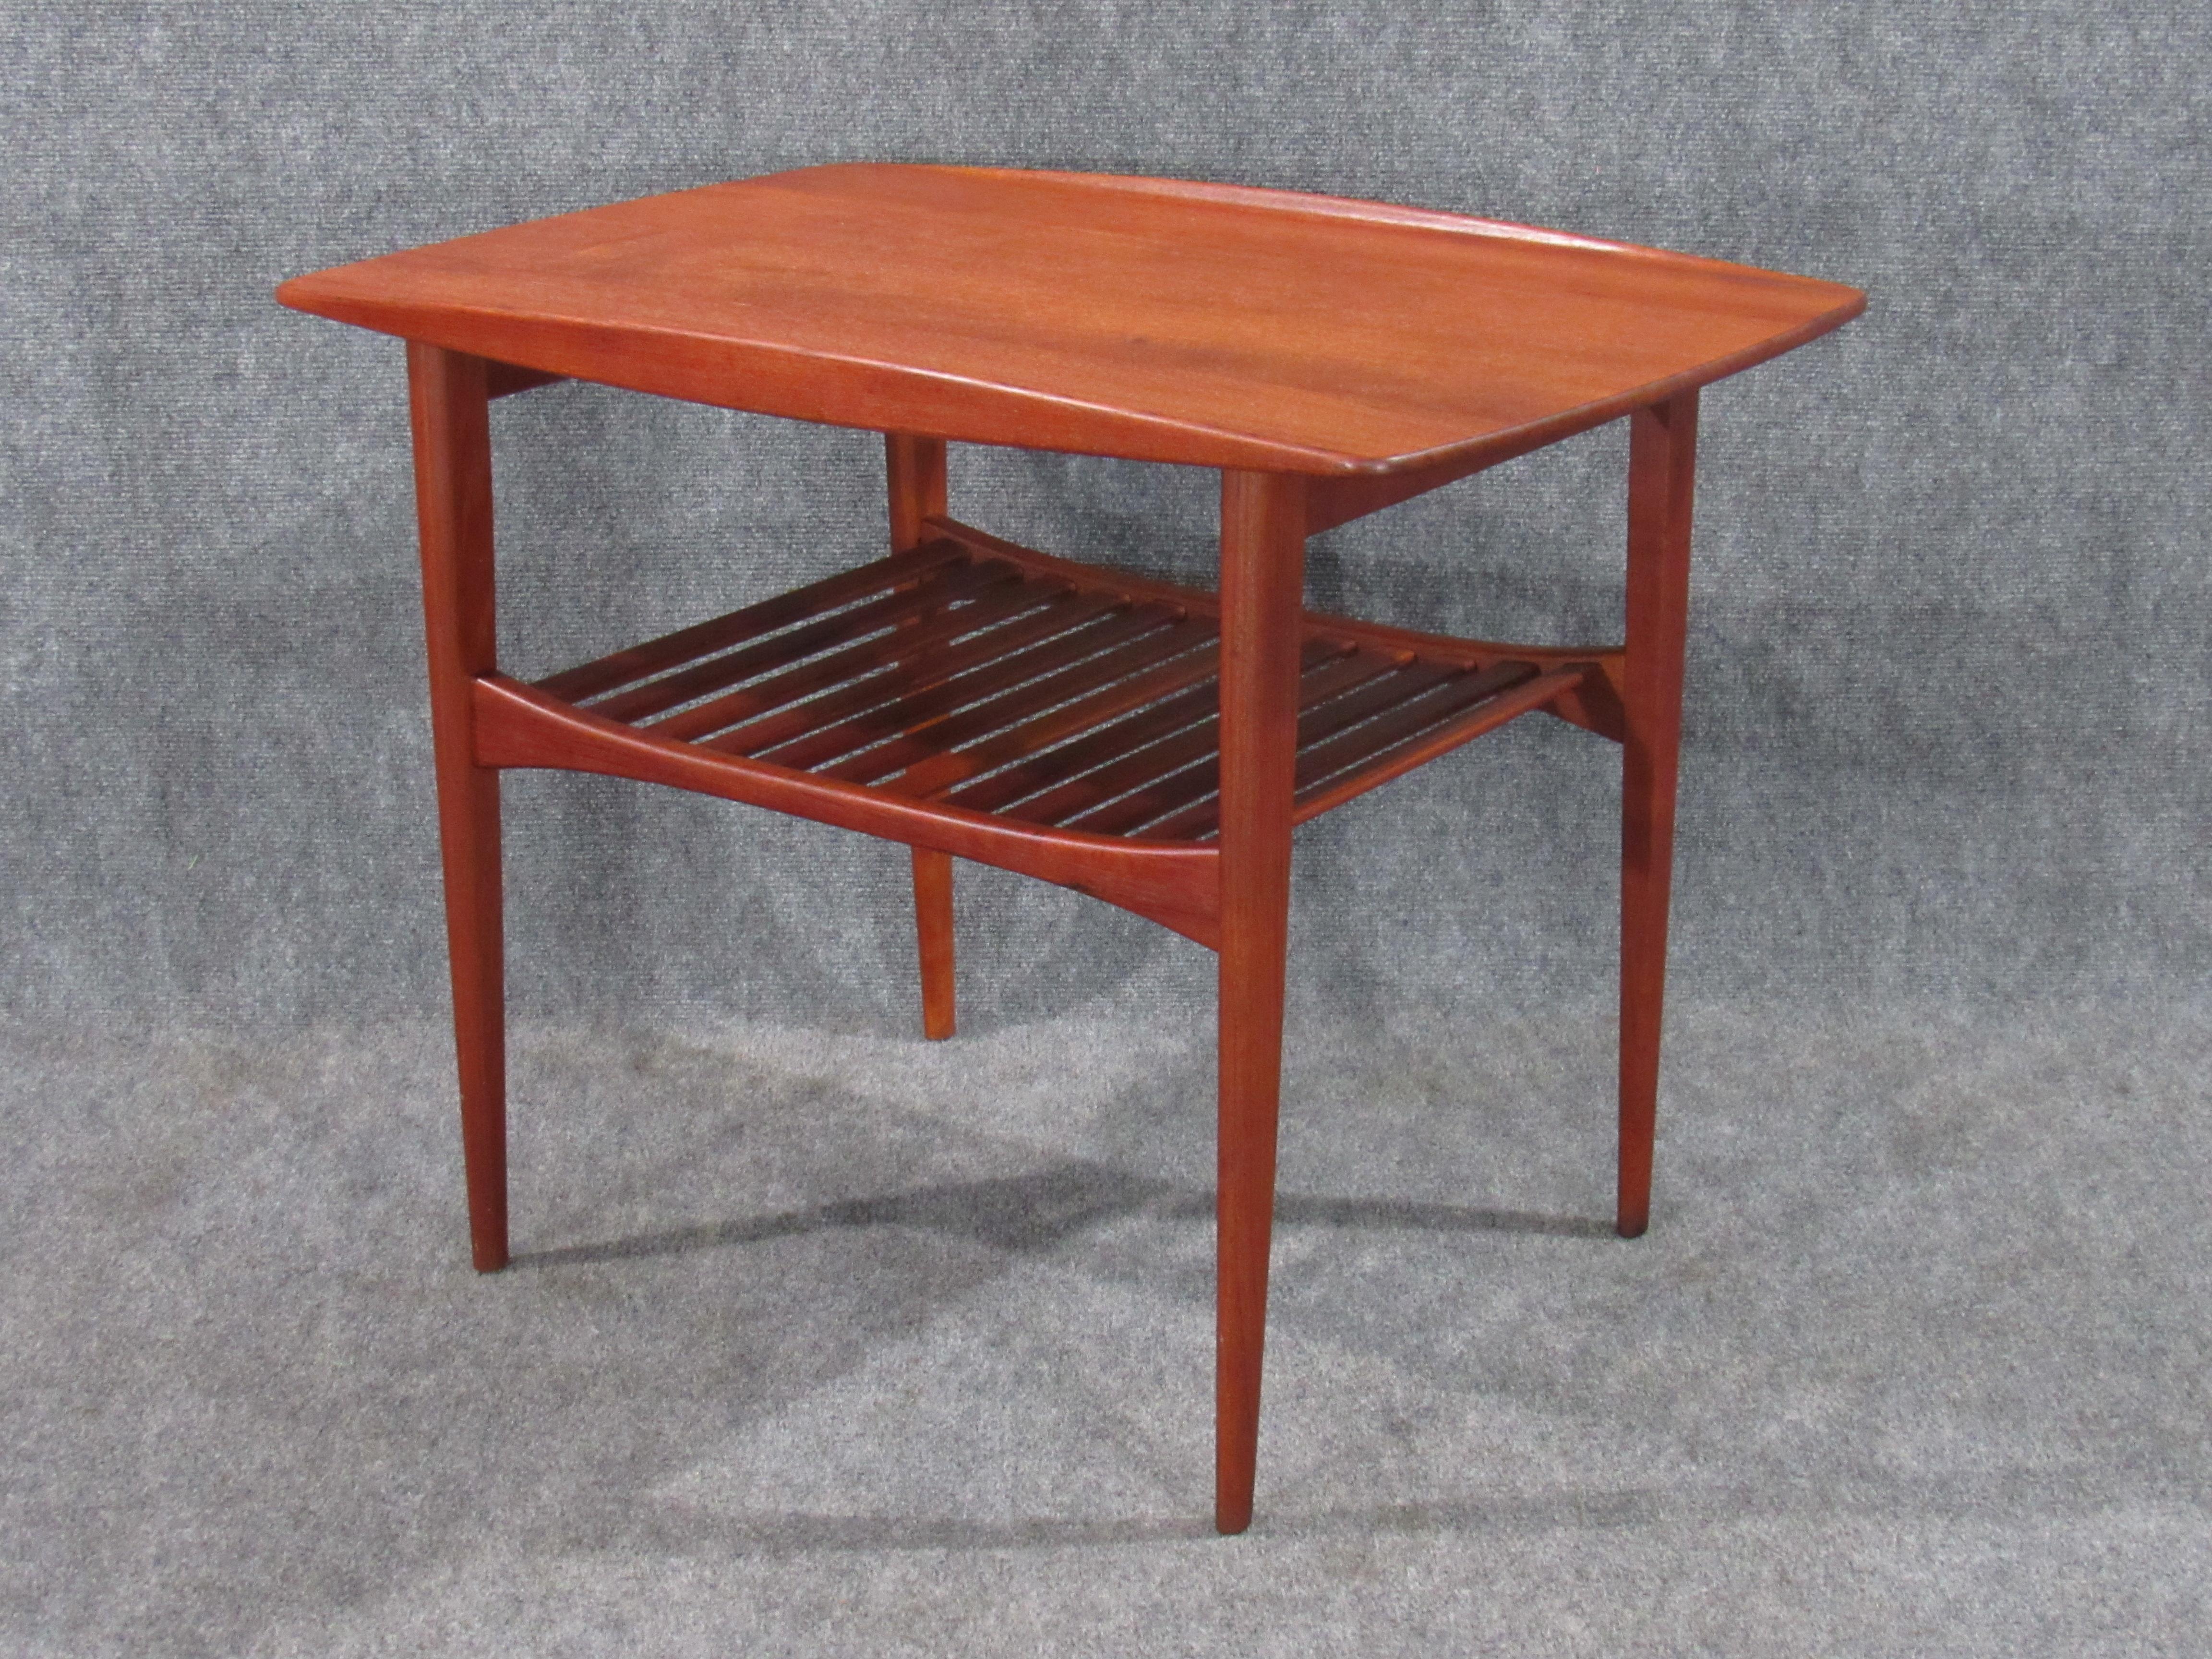 Danish modern early Finn Juhl teak table for France and Daverkosen. An early example of a classic design by the master - Finn Juhl, circa 1950s. Numbered 510 of 1015 in marker, FD stamp and John Stuart metal badge (distributor) on underside of piece.